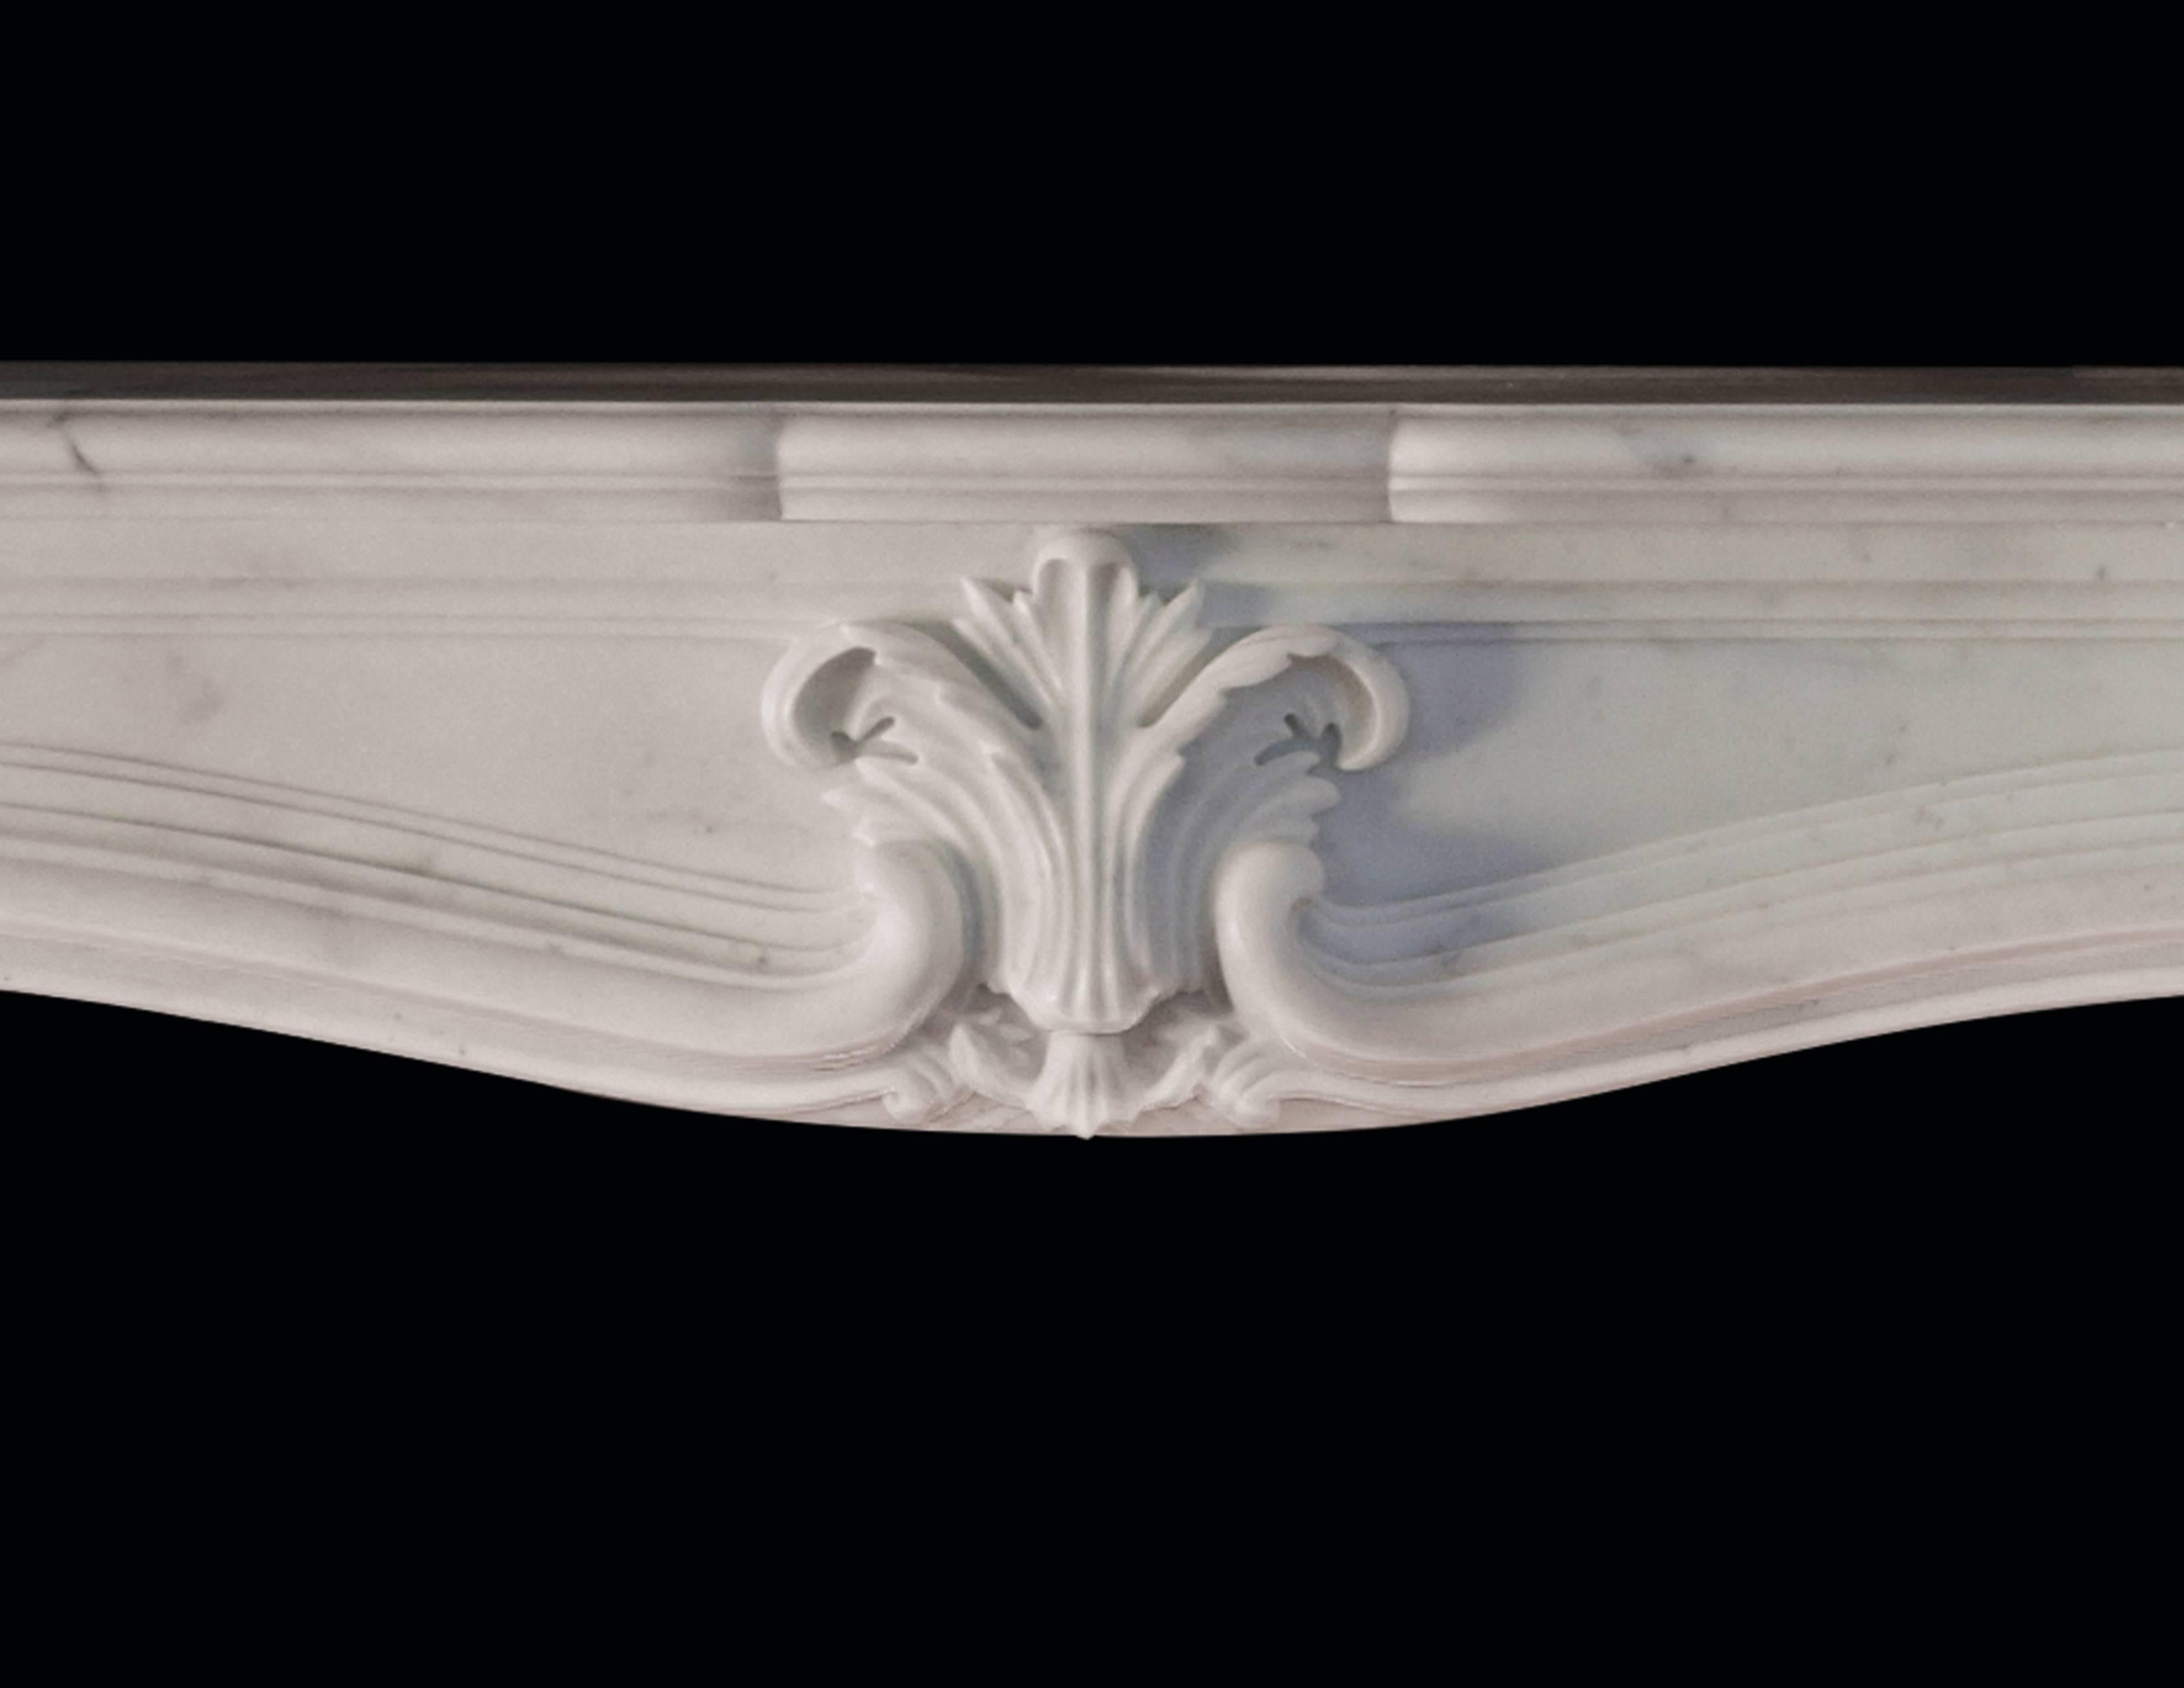 A Louis XV style mantel with Rococo influences. La Rochelle displays delicate carved detail beneath a serpentine shelf.

Opening dimensions: 44 1/2